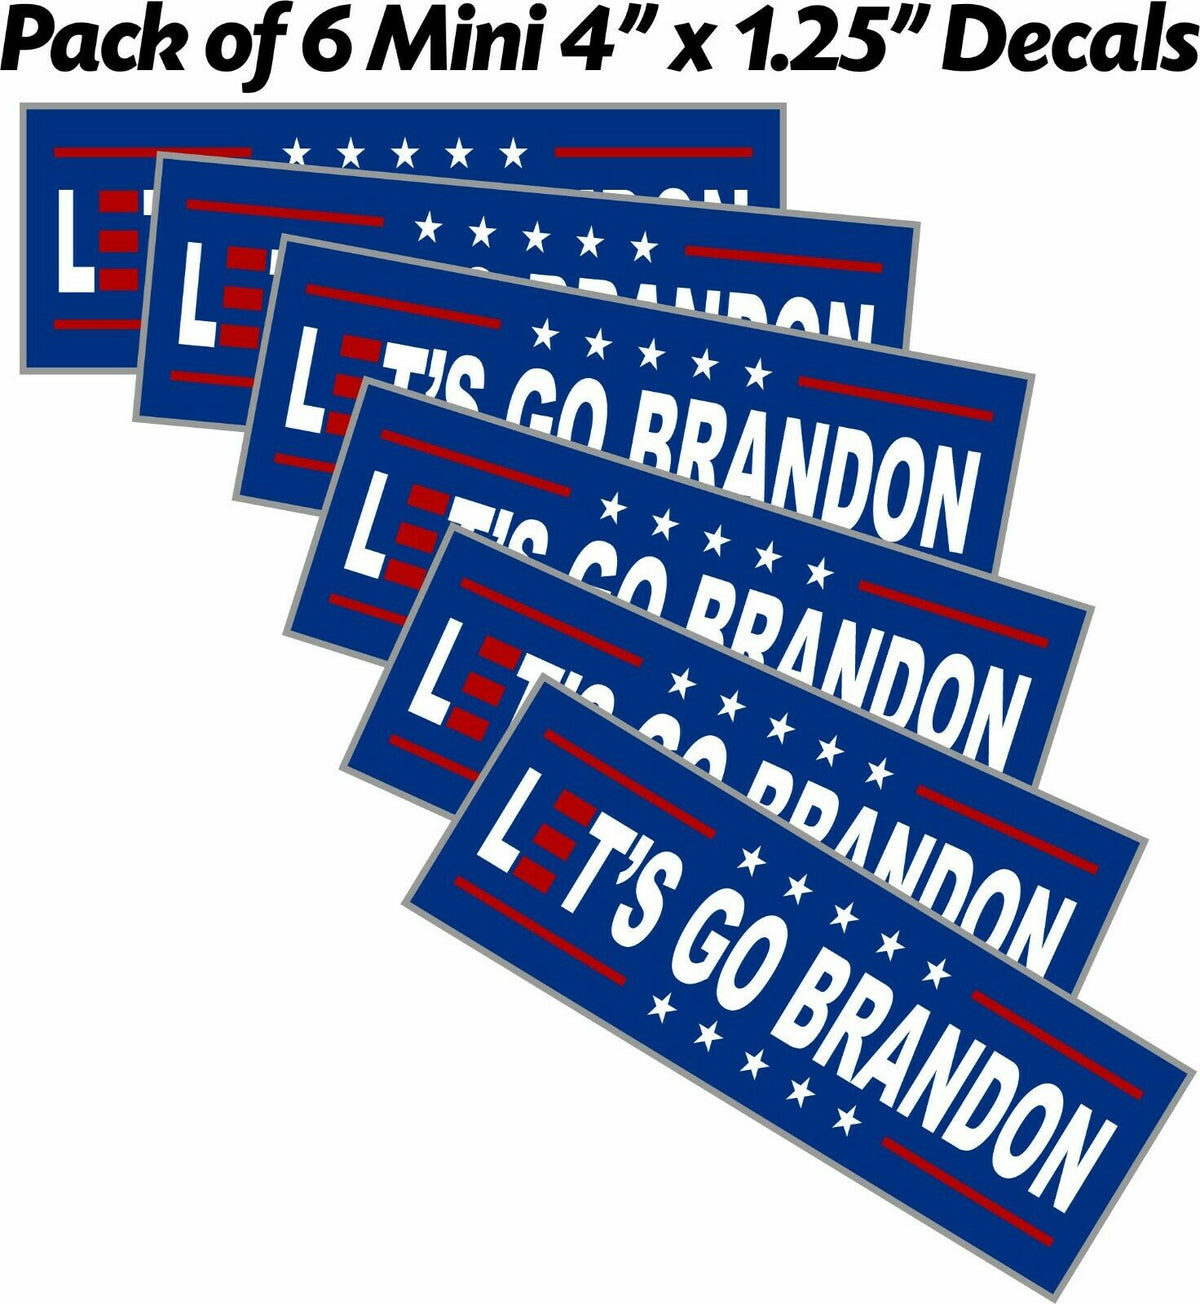 Let's Go Brandon Sticker Pack of 6 Stickers 4" x 1.25" Small Stickers FJB FU46 - Powercall Sirens LLC